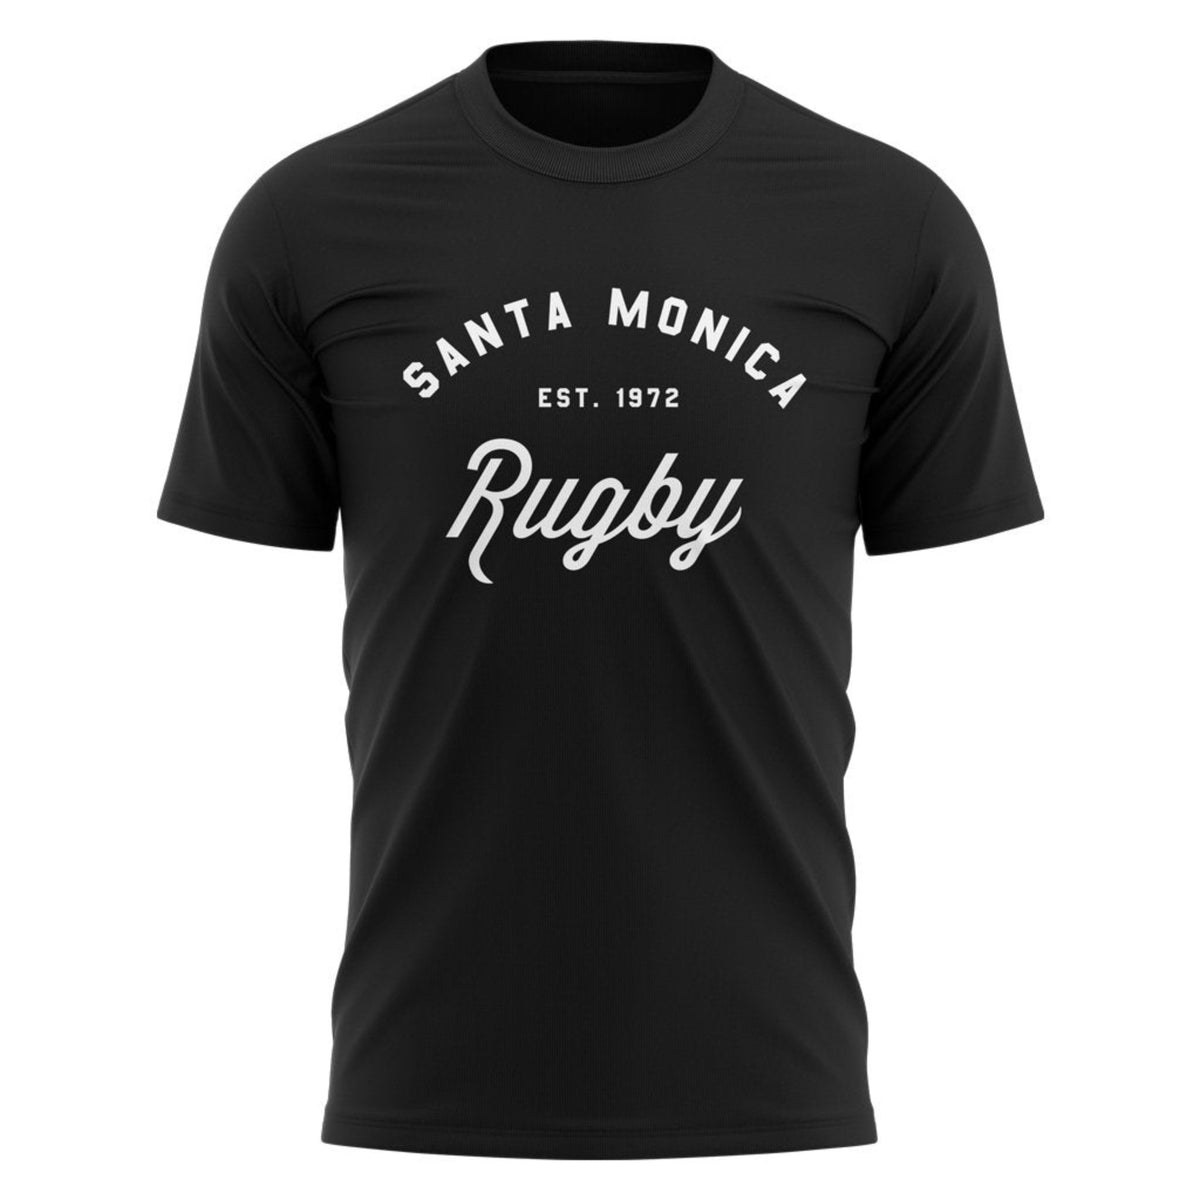 Santa Monica Rugby Club &quot;Classic&quot; Tee - Men&#39;s Black Or Grey - www.therugbyshop.com www.therugbyshop.com MEN&#39;S / BLACK / S XIX Brands TEES Santa Monica Rugby Club &quot;Classic&quot; Tee - Men&#39;s Black Or Grey